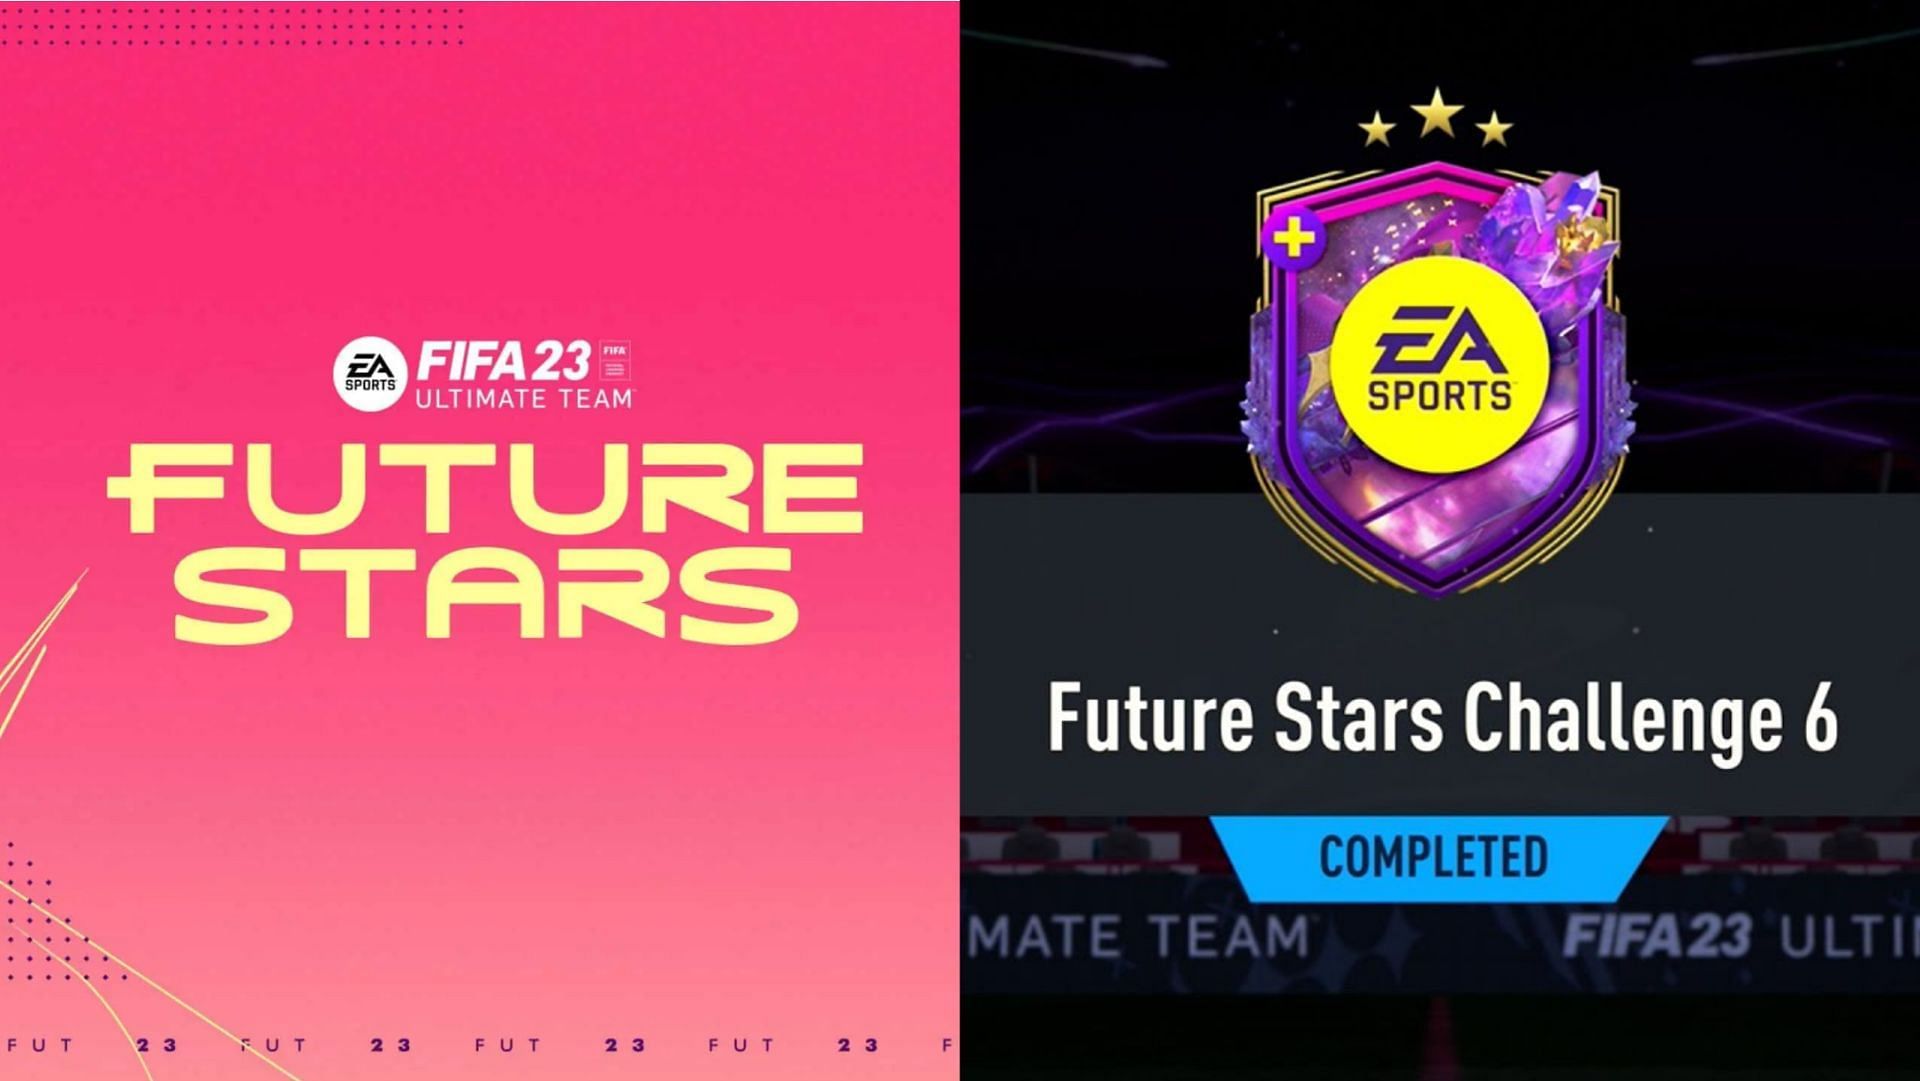 FIFA 23 players can improve their swaps program rewards by completing the Future Stars Challenge 6 SBC in Ultimate Team (Images via EA Sports)